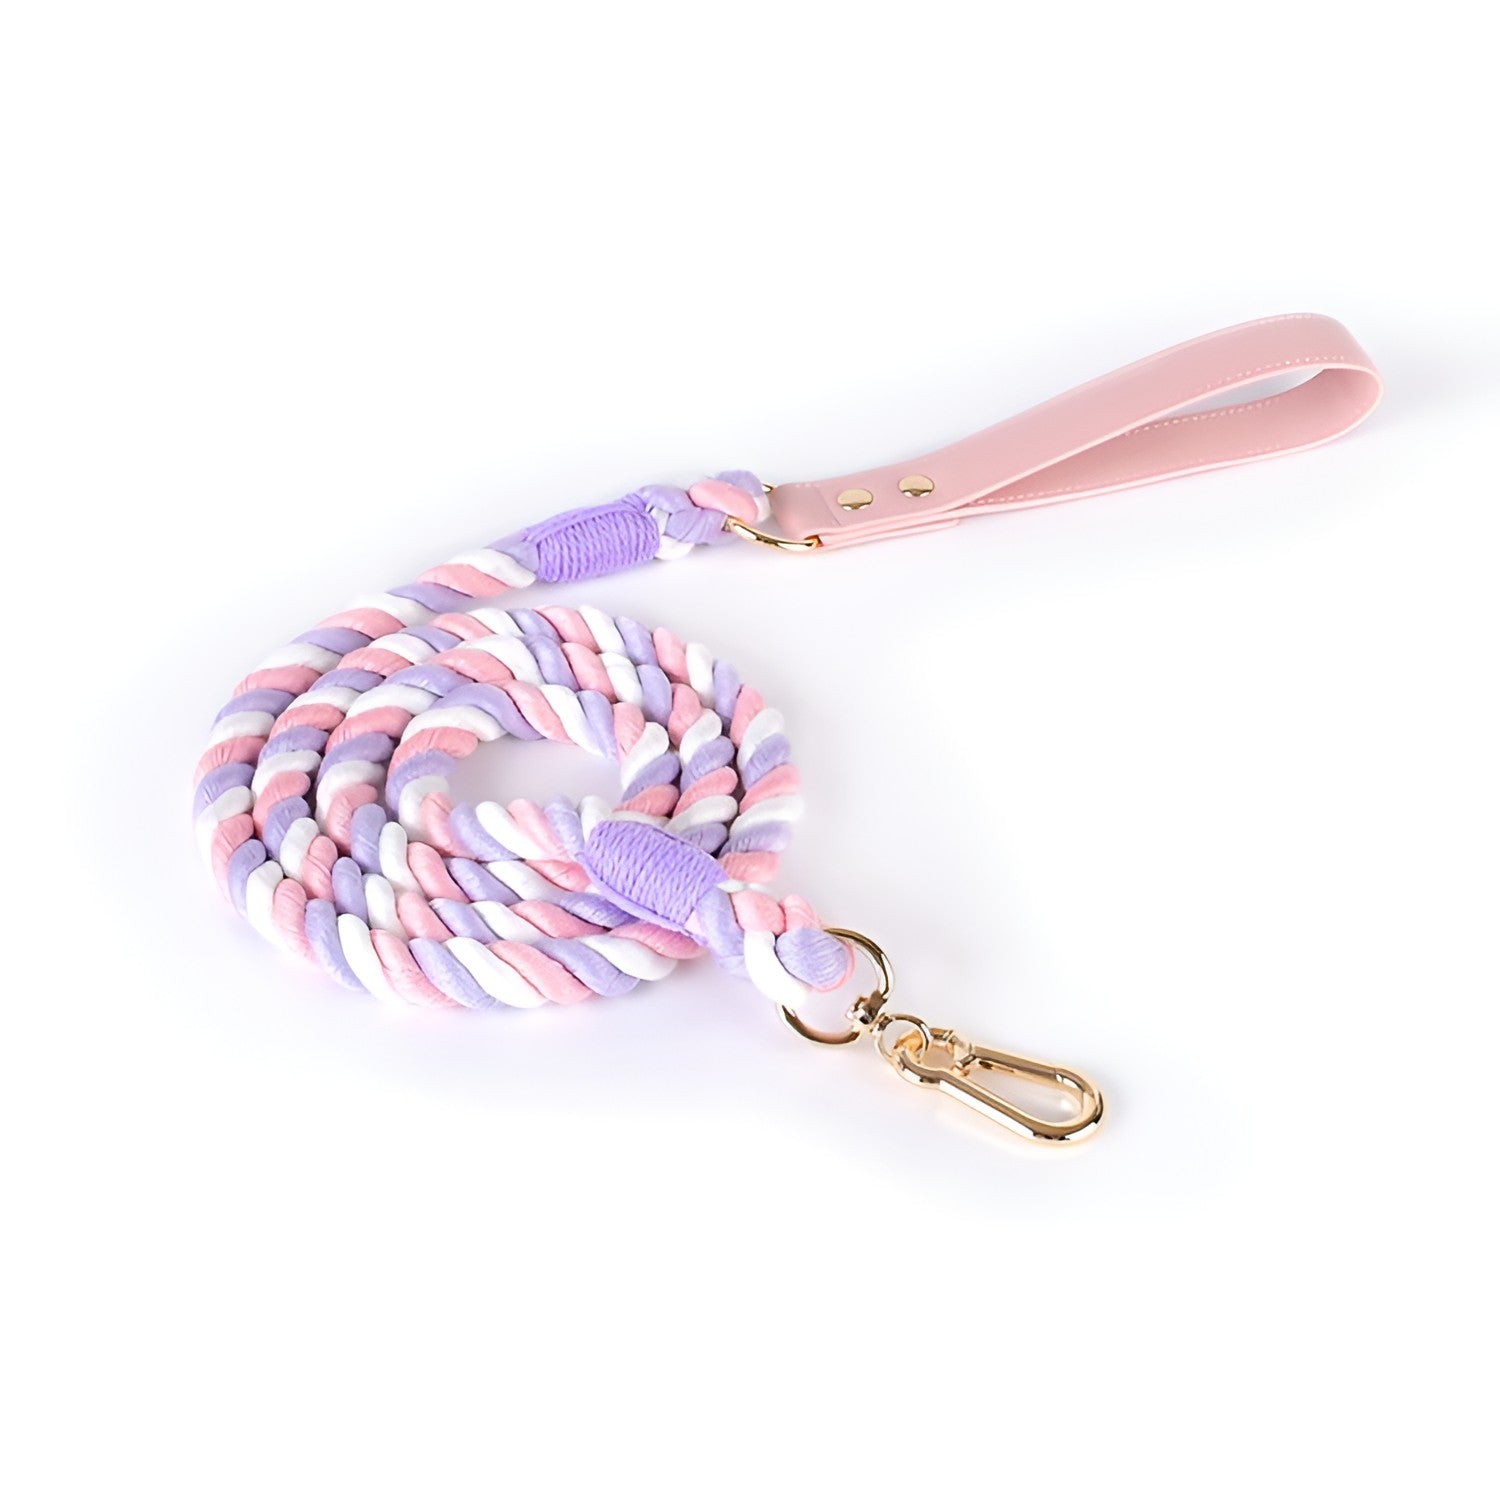  Soft, elastic handle on Loofie leash for a comfortable grip